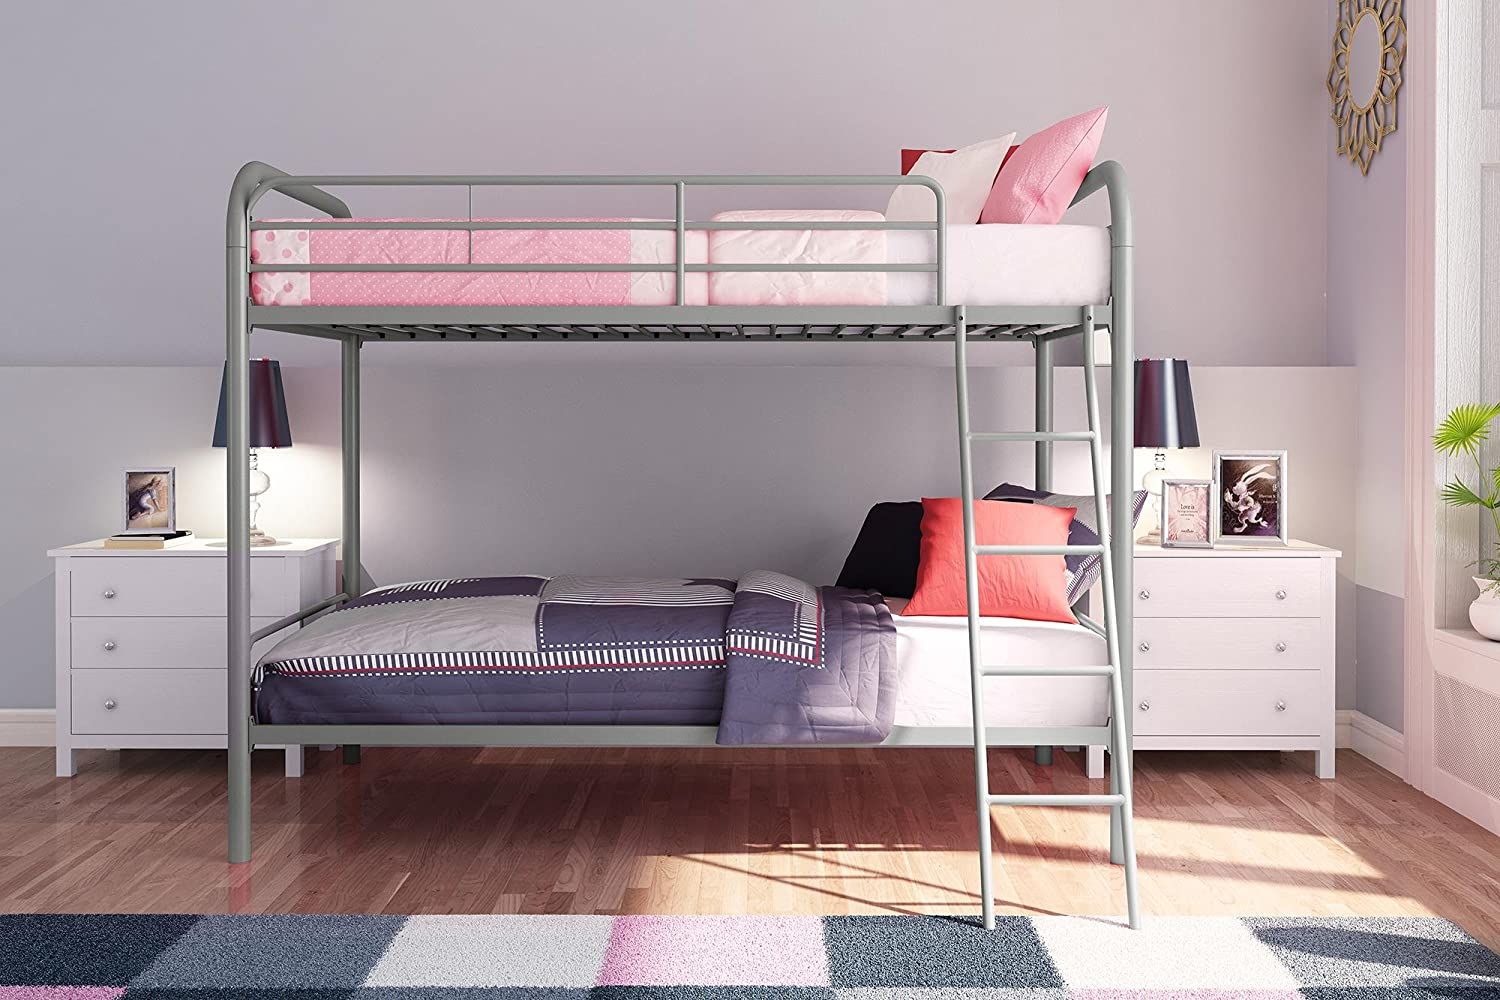 8 Best Bunk Beds 2020 The Strategist, Old Bunk Beds White